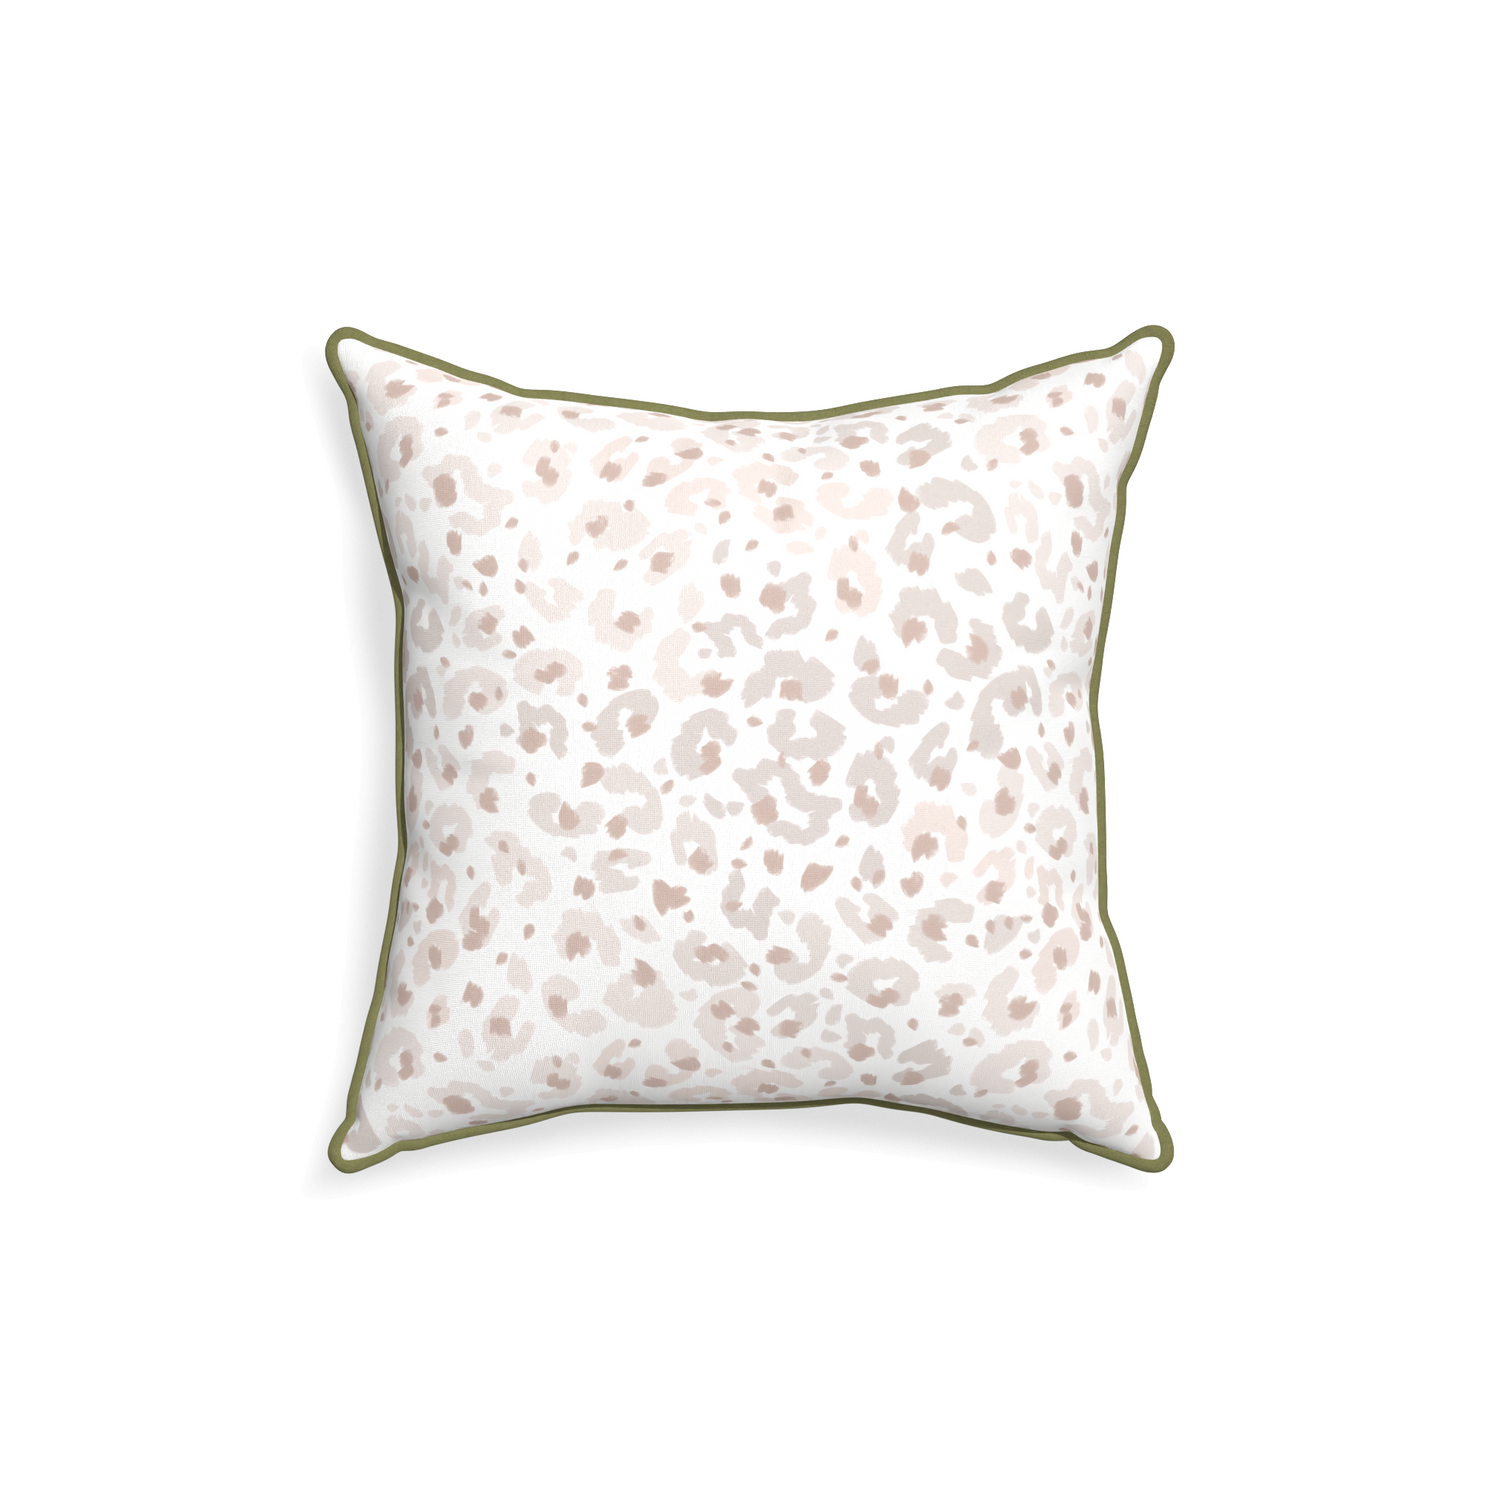 18-square rosie custom pillow with moss piping on white background